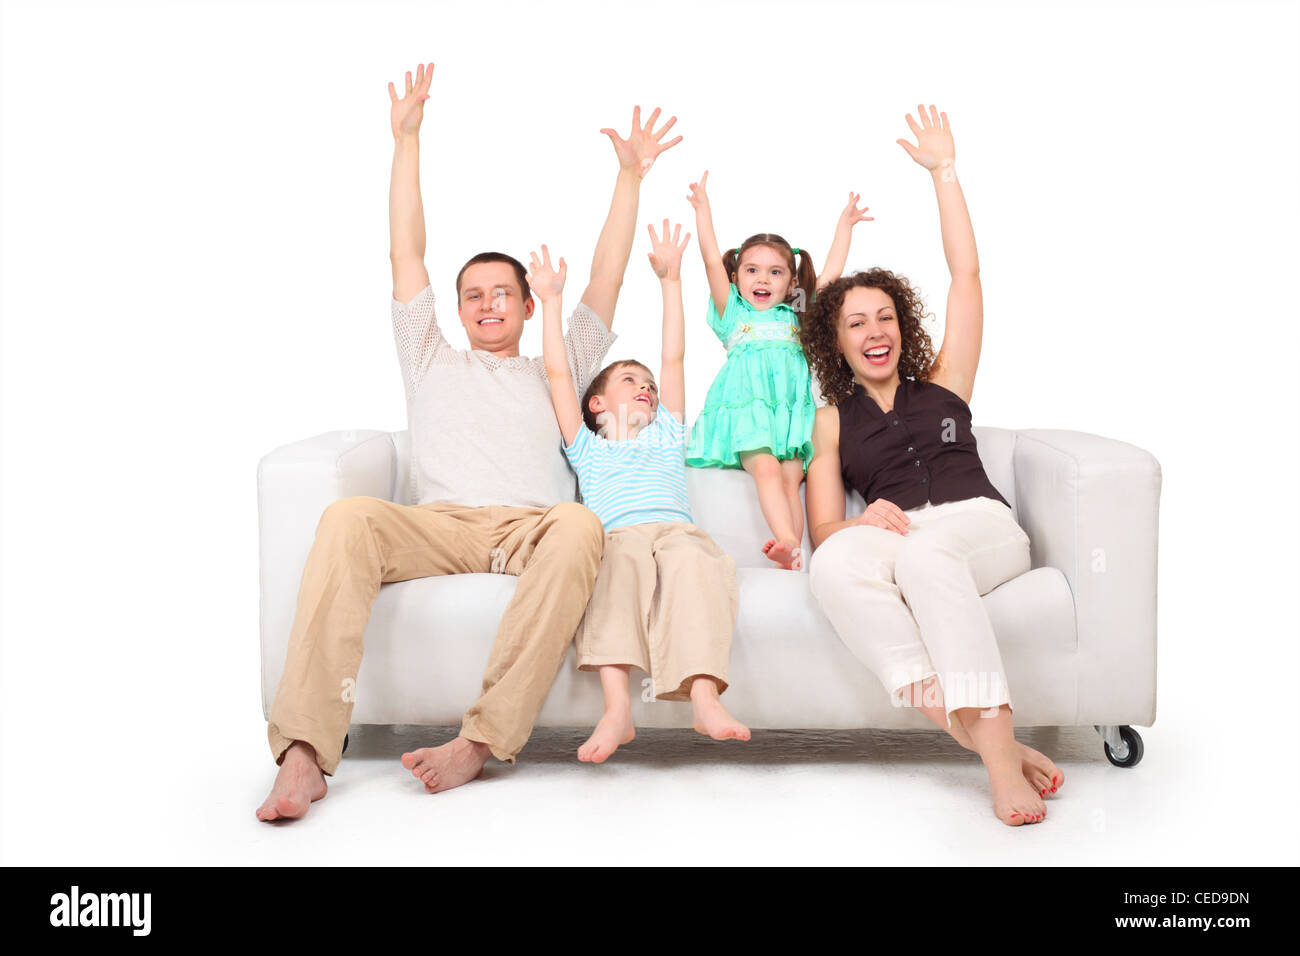 Parents and children with rised hands  on white leather sofa Stock Photo